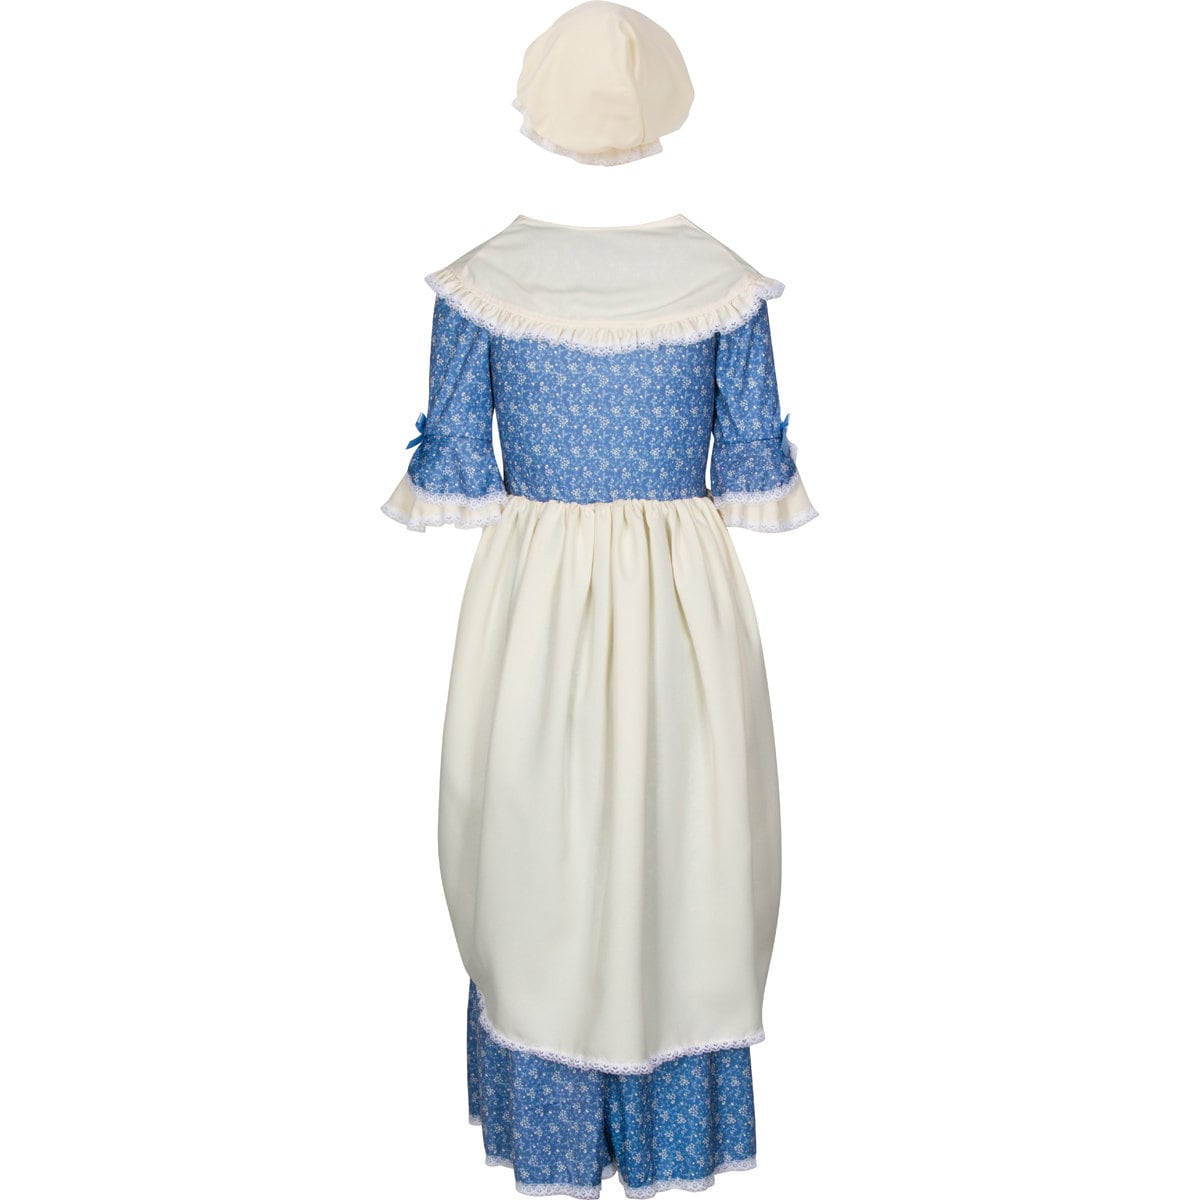 Colonial Girls Day Dress Costume